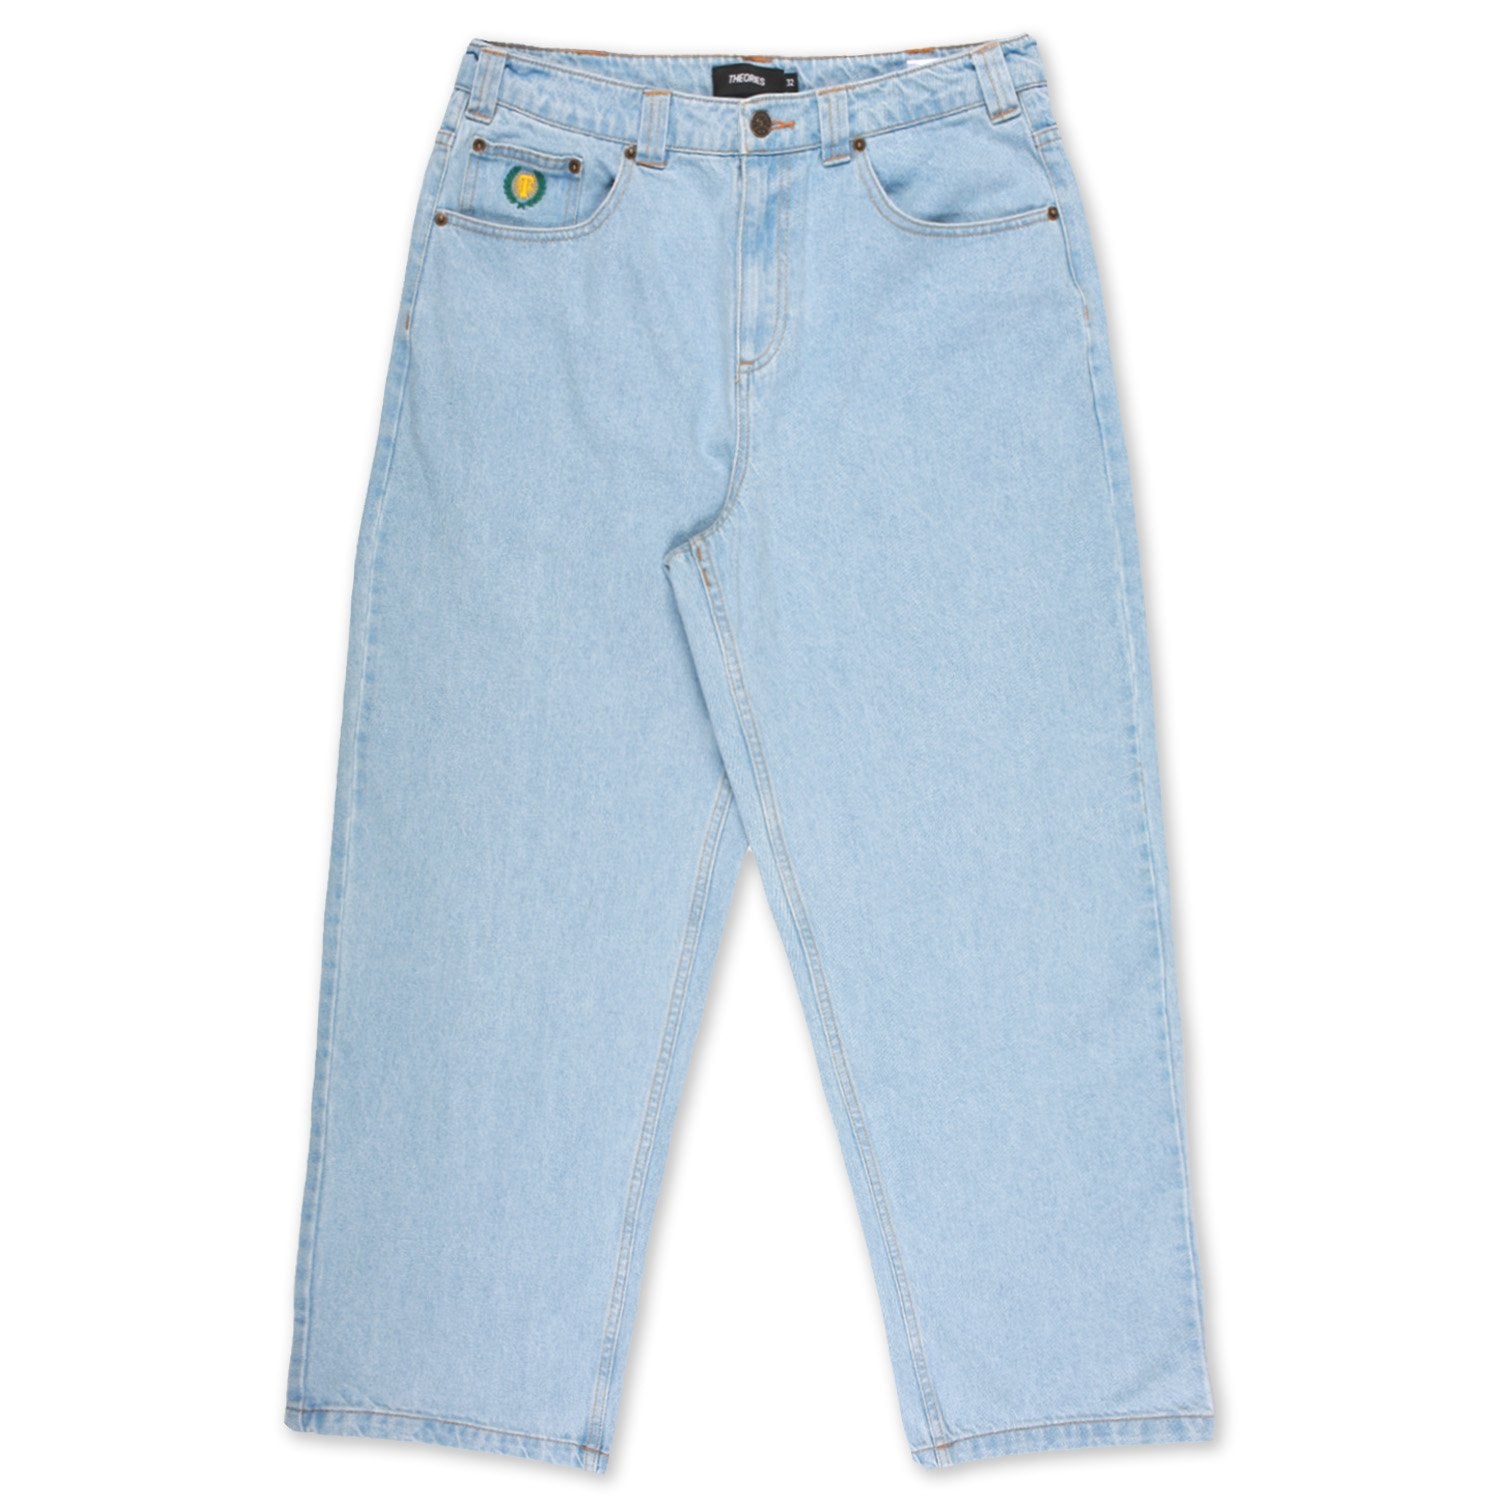 Theories Plaza Jeans Washed Light Blue Baggy Fit